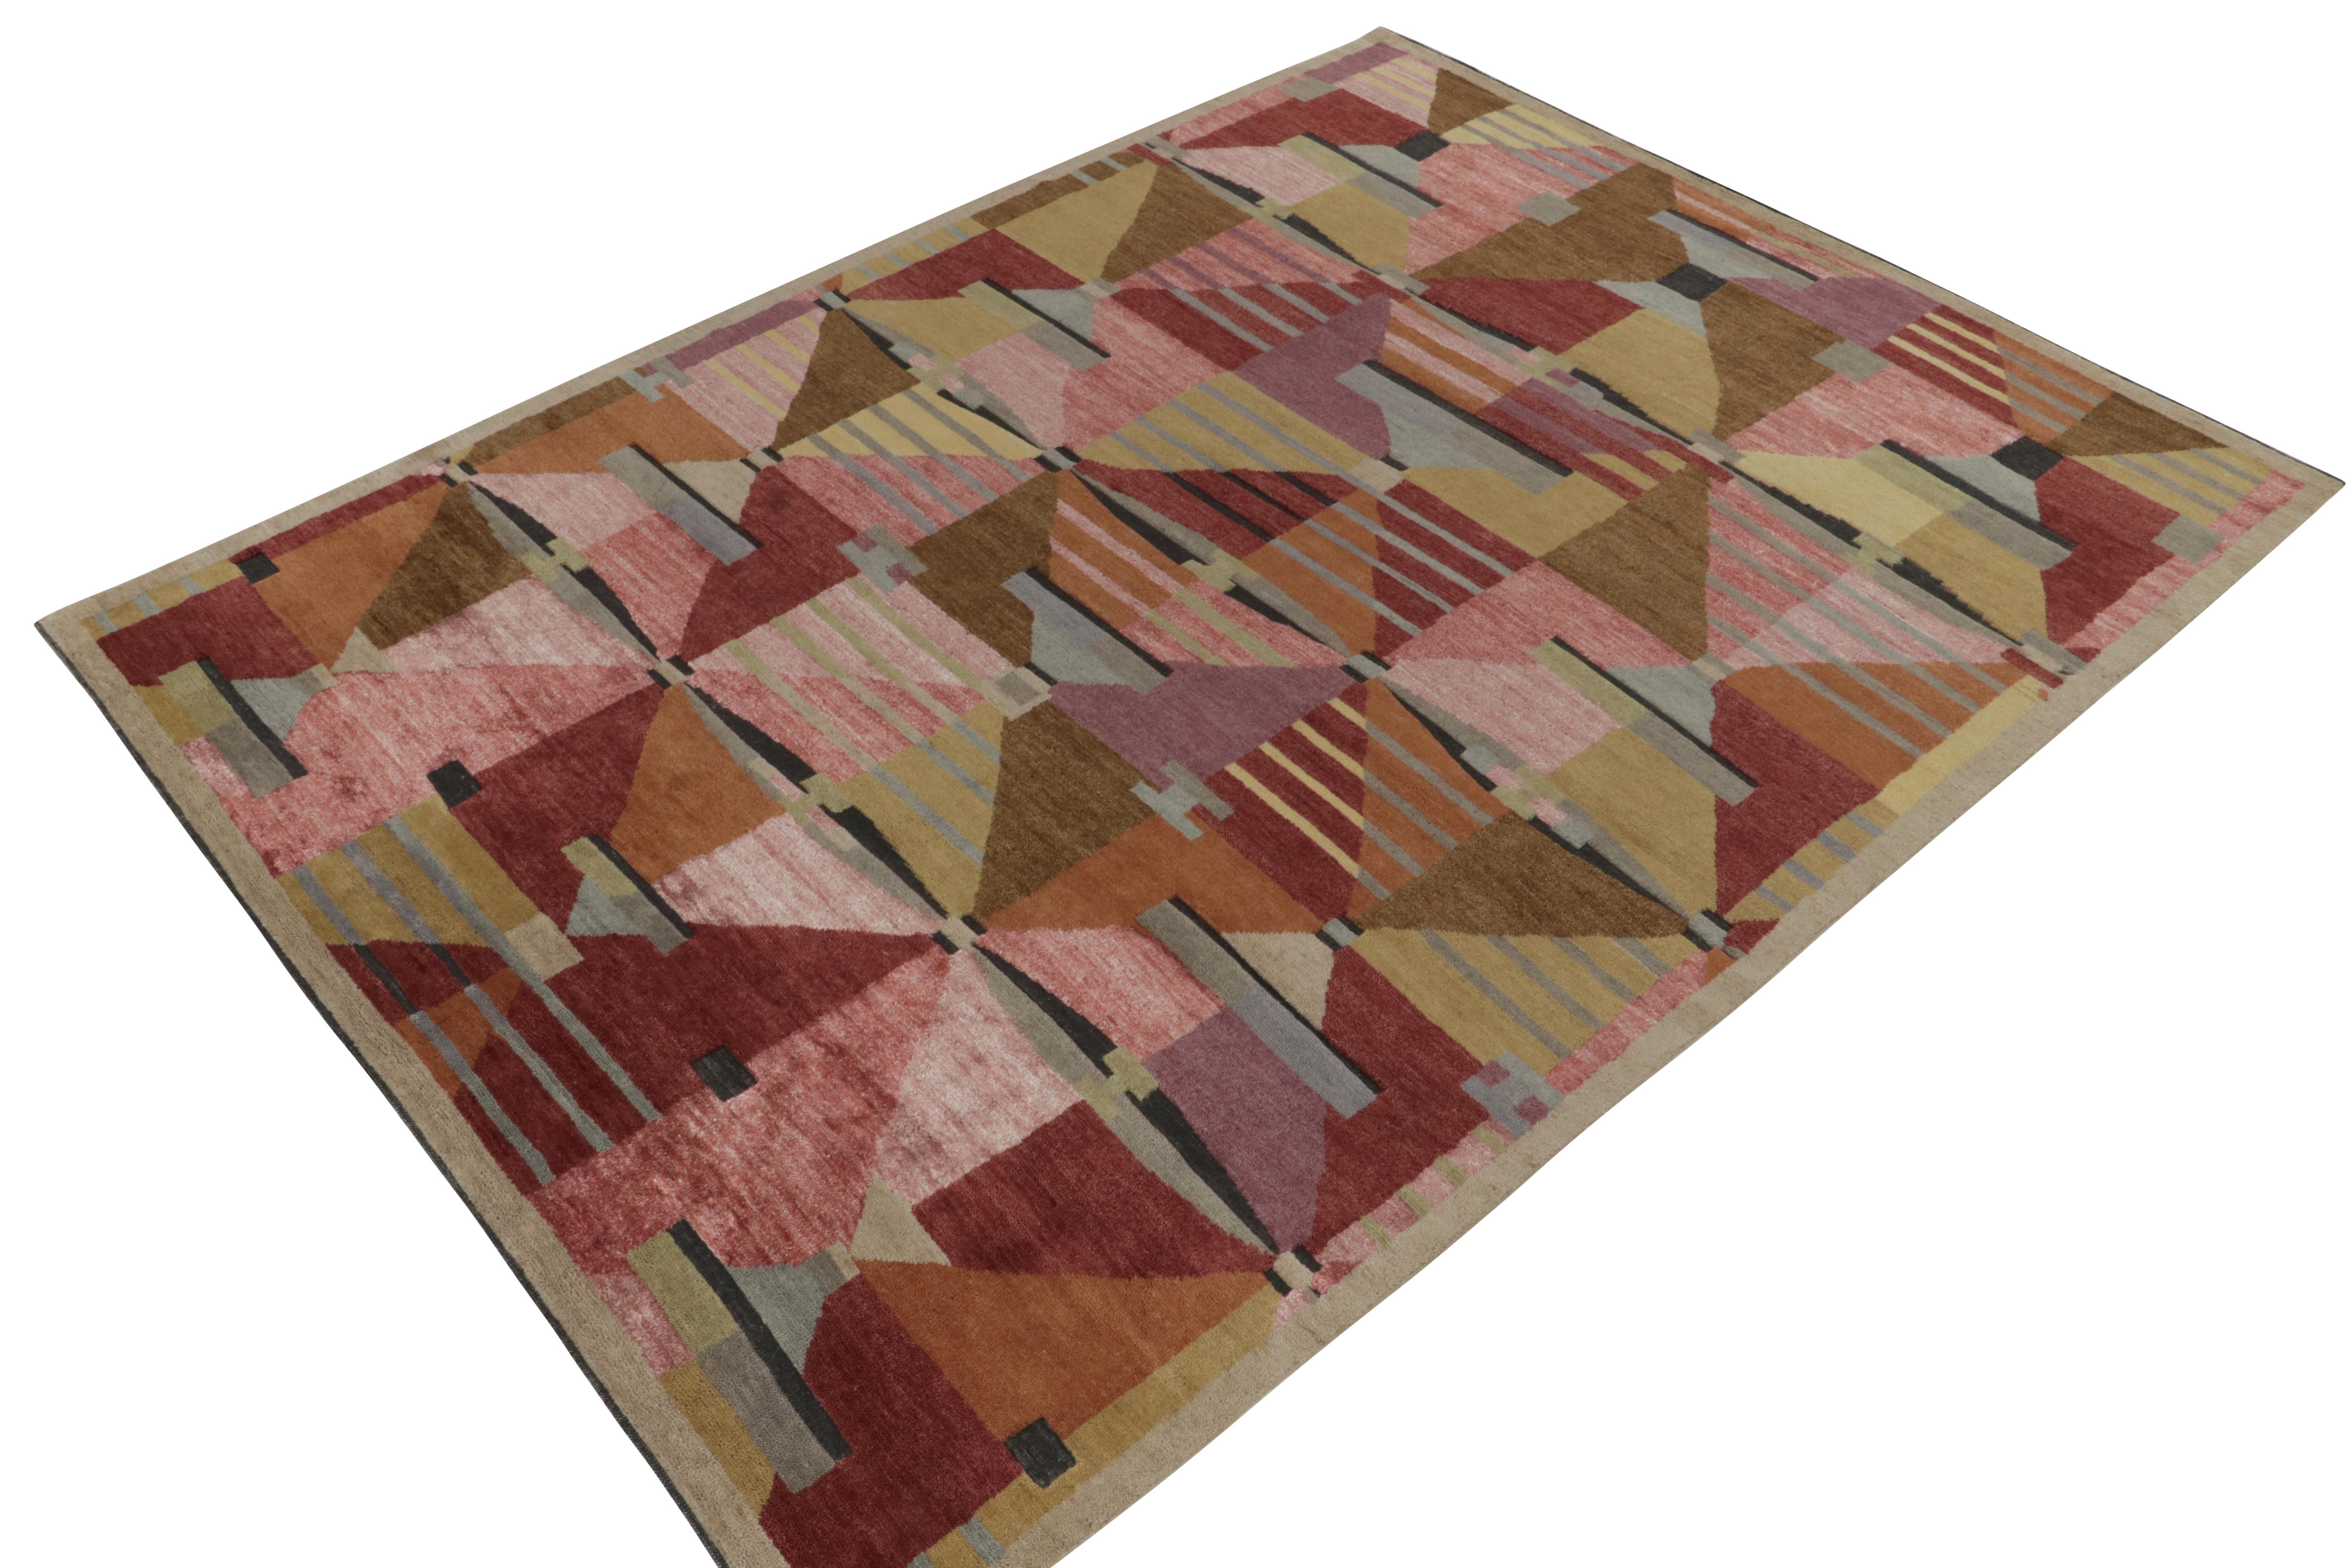 Hand-knotted in wool, a 9x12 ode to Swedish Deco rug styles, from Rug & Kilim’s exciting new Deco Collection. 

On the design: Inspired by Scandinavian works of the mid 20th century, a brilliant spectrum of pinks, reds, browns and golds create such